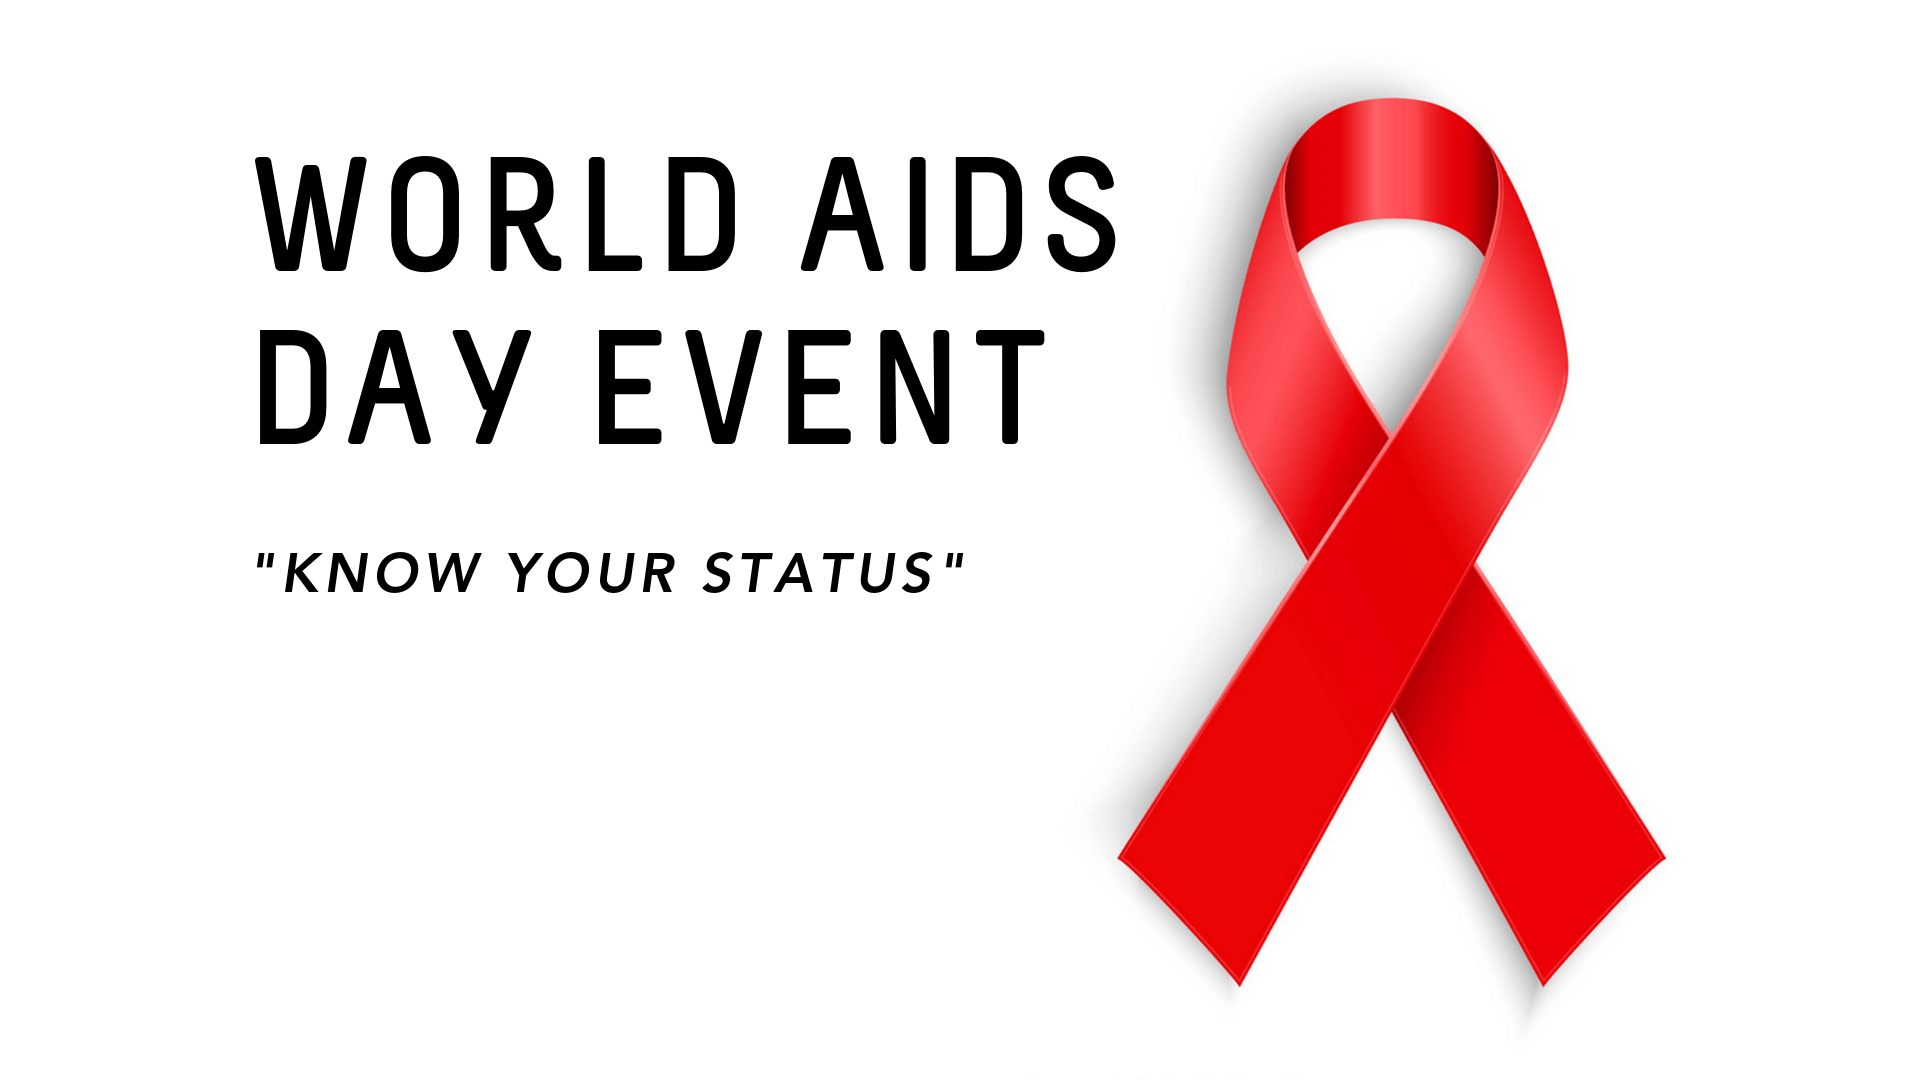 Join our World AIDS Day event Richmond Community Health